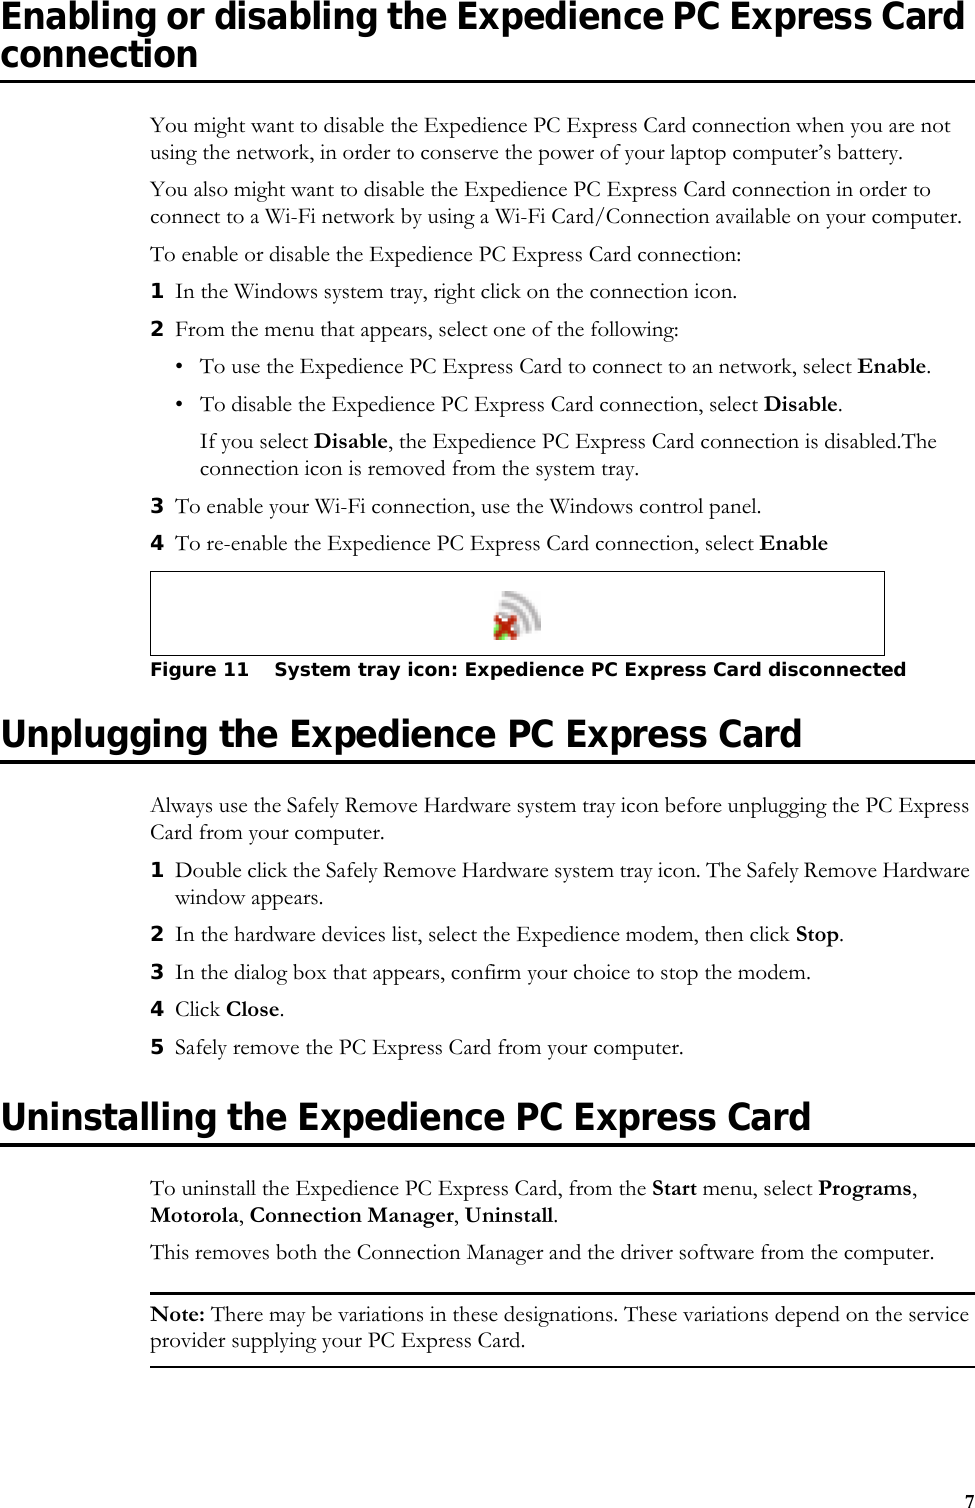 7Enabling or disabling the Expedience PC Express Card connectionYou might want to disable the Expedience PC Express Card connection when you are not using the network, in order to conserve the power of your laptop computer’s battery.You also might want to disable the Expedience PC Express Card connection in order to connect to a Wi-Fi network by using a Wi-Fi Card/Connection available on your computer.To enable or disable the Expedience PC Express Card connection:1In the Windows system tray, right click on the connection icon.2From the menu that appears, select one of the following: • To use the Expedience PC Express Card to connect to an network, select Enable.• To disable the Expedience PC Express Card connection, select Disable. If you select Disable, the Expedience PC Express Card connection is disabled.The connection icon is removed from the system tray. 3To enable your Wi-Fi connection, use the Windows control panel.4To re-enable the Expedience PC Express Card connection, select EnableUnplugging the Expedience PC Express CardAlways use the Safely Remove Hardware system tray icon before unplugging the PC Express Card from your computer. 1Double click the Safely Remove Hardware system tray icon. The Safely Remove Hardware window appears. 2In the hardware devices list, select the Expedience modem, then click Stop.3In the dialog box that appears, confirm your choice to stop the modem. 4Click Close. 5Safely remove the PC Express Card from your computer. Uninstalling the Expedience PC Express CardTo uninstall the Expedience PC Express Card, from the Start menu, select Programs, Motorola, Connection Manager, Uninstall. This removes both the Connection Manager and the driver software from the computer. Note: There may be variations in these designations. These variations depend on the service provider supplying your PC Express Card. Figure 11 System tray icon: Expedience PC Express Card disconnected